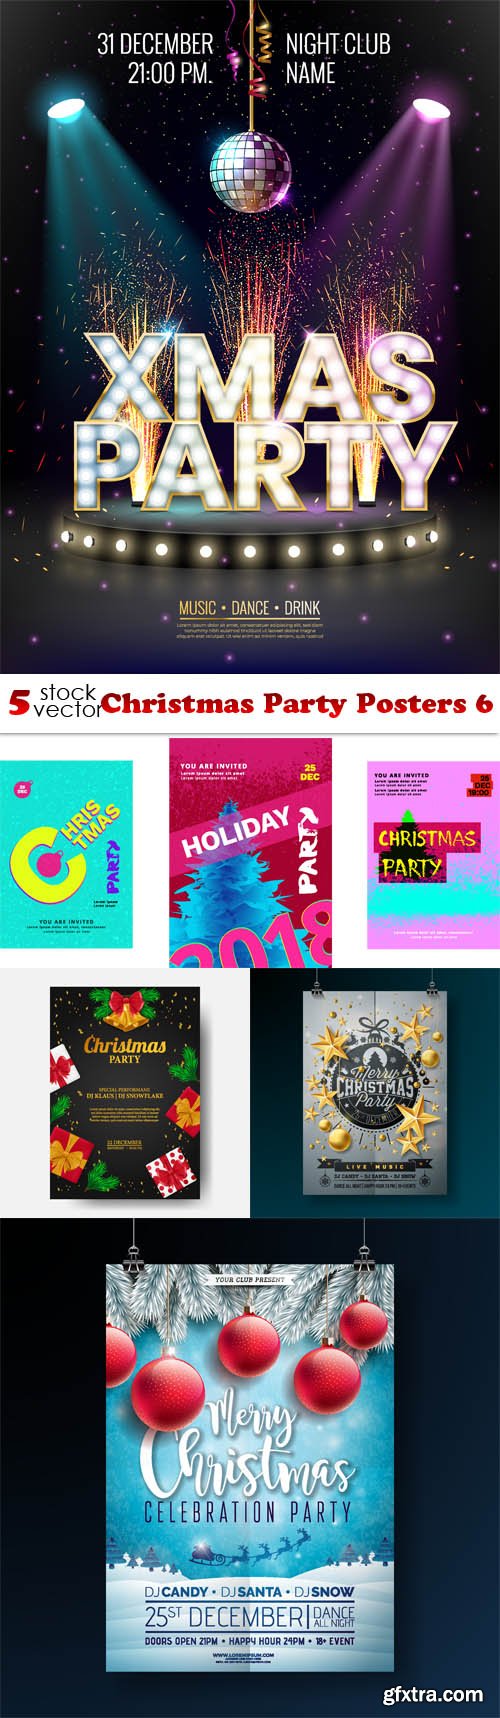 Vectors - Christmas Party Posters 6